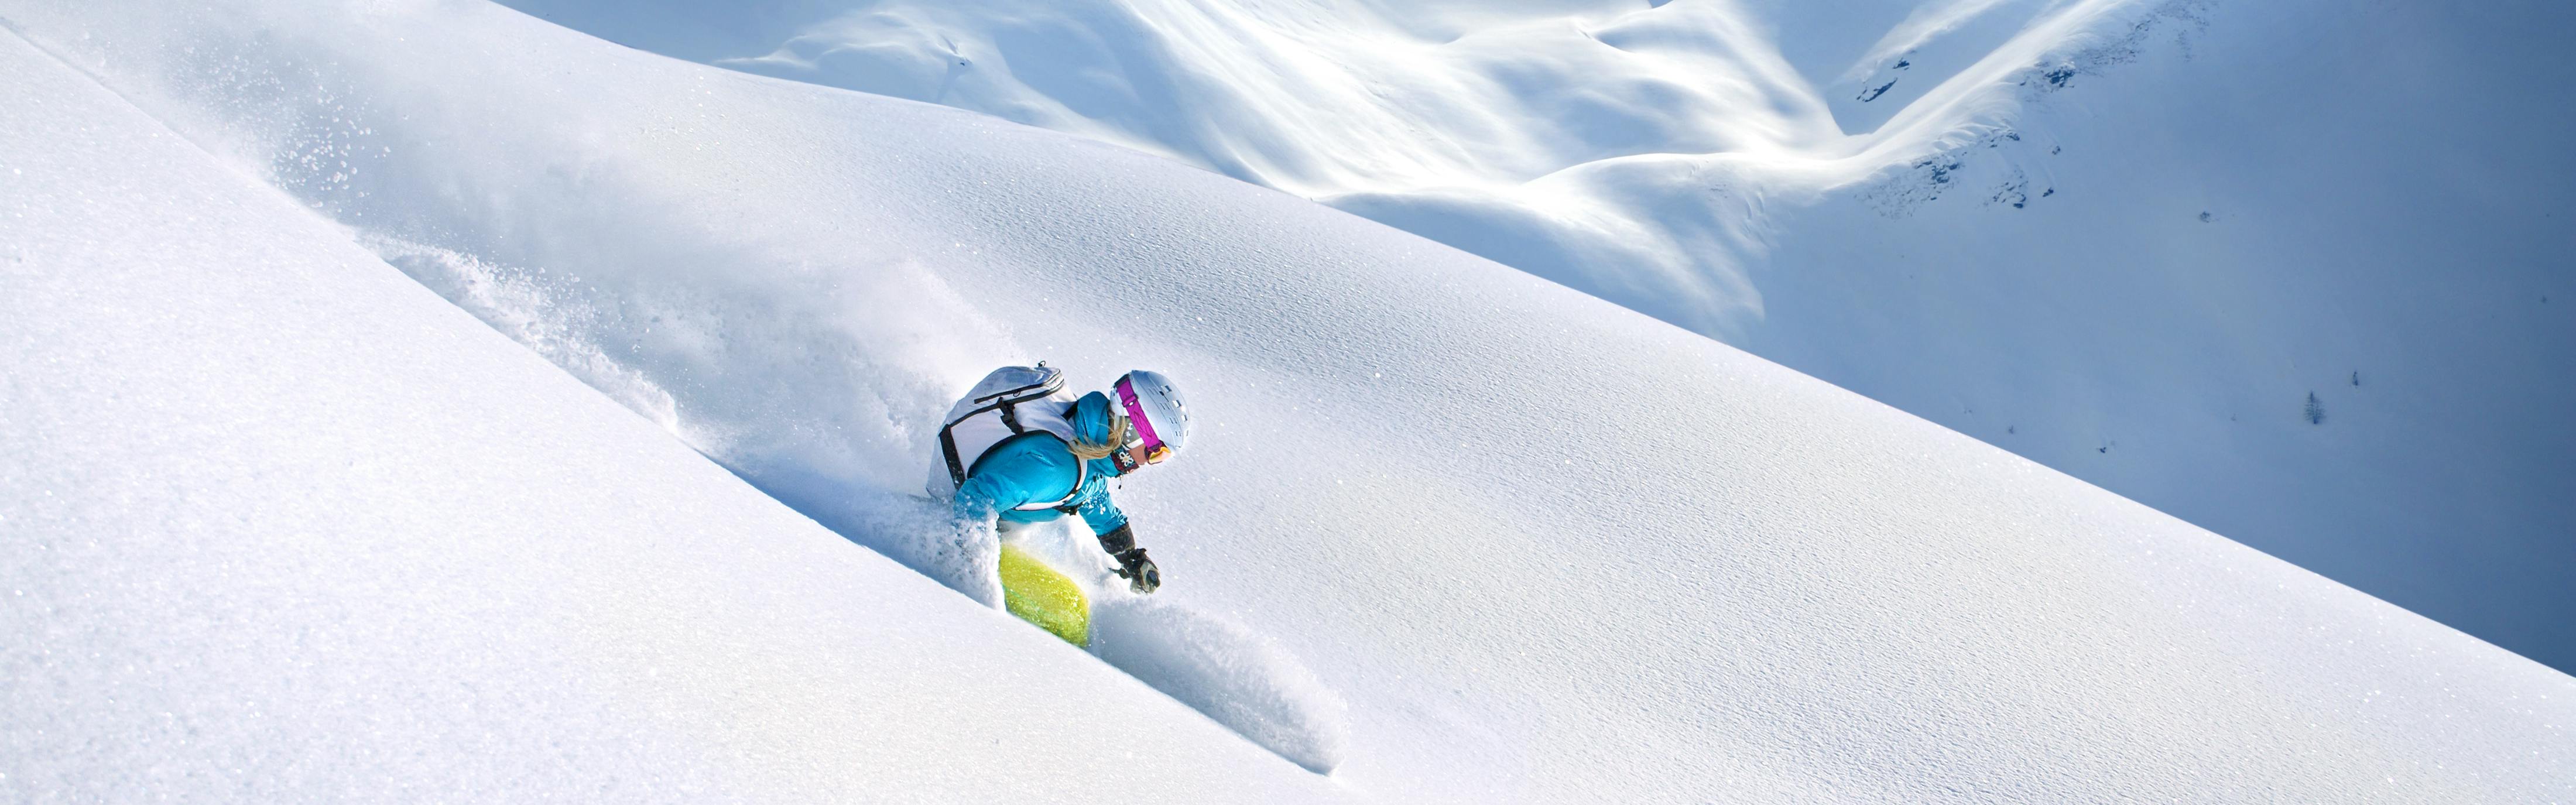 A skier turns down a snowy slope with her white backpack, white helmet, and blue jacket. 